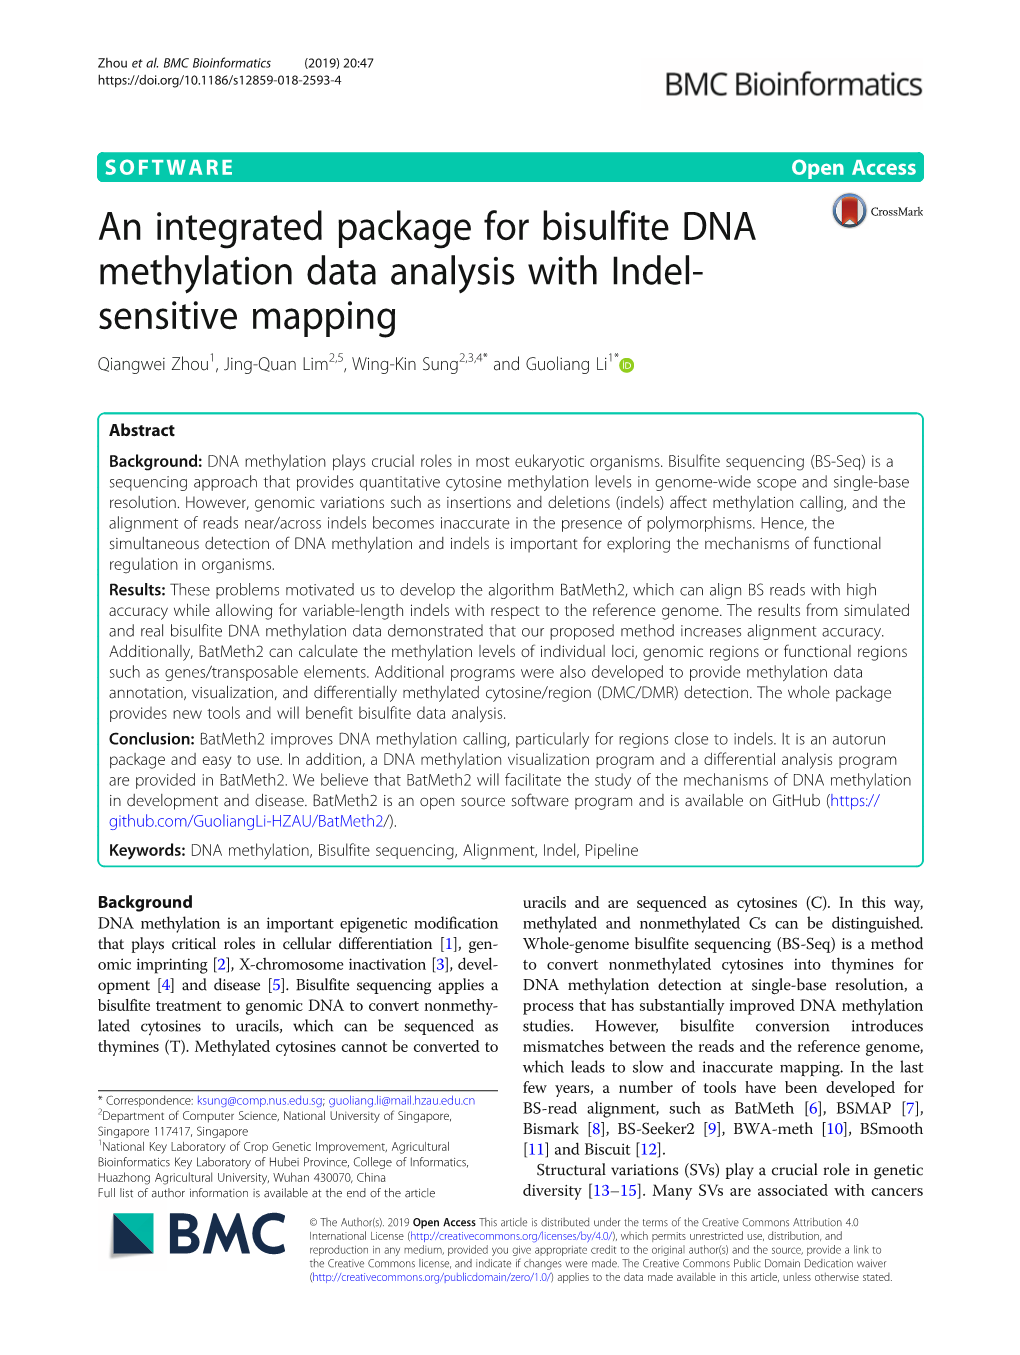 An Integrated Package for Bisulfite DNA Methylation Data Analysis with Indel-Sensitive Mapping